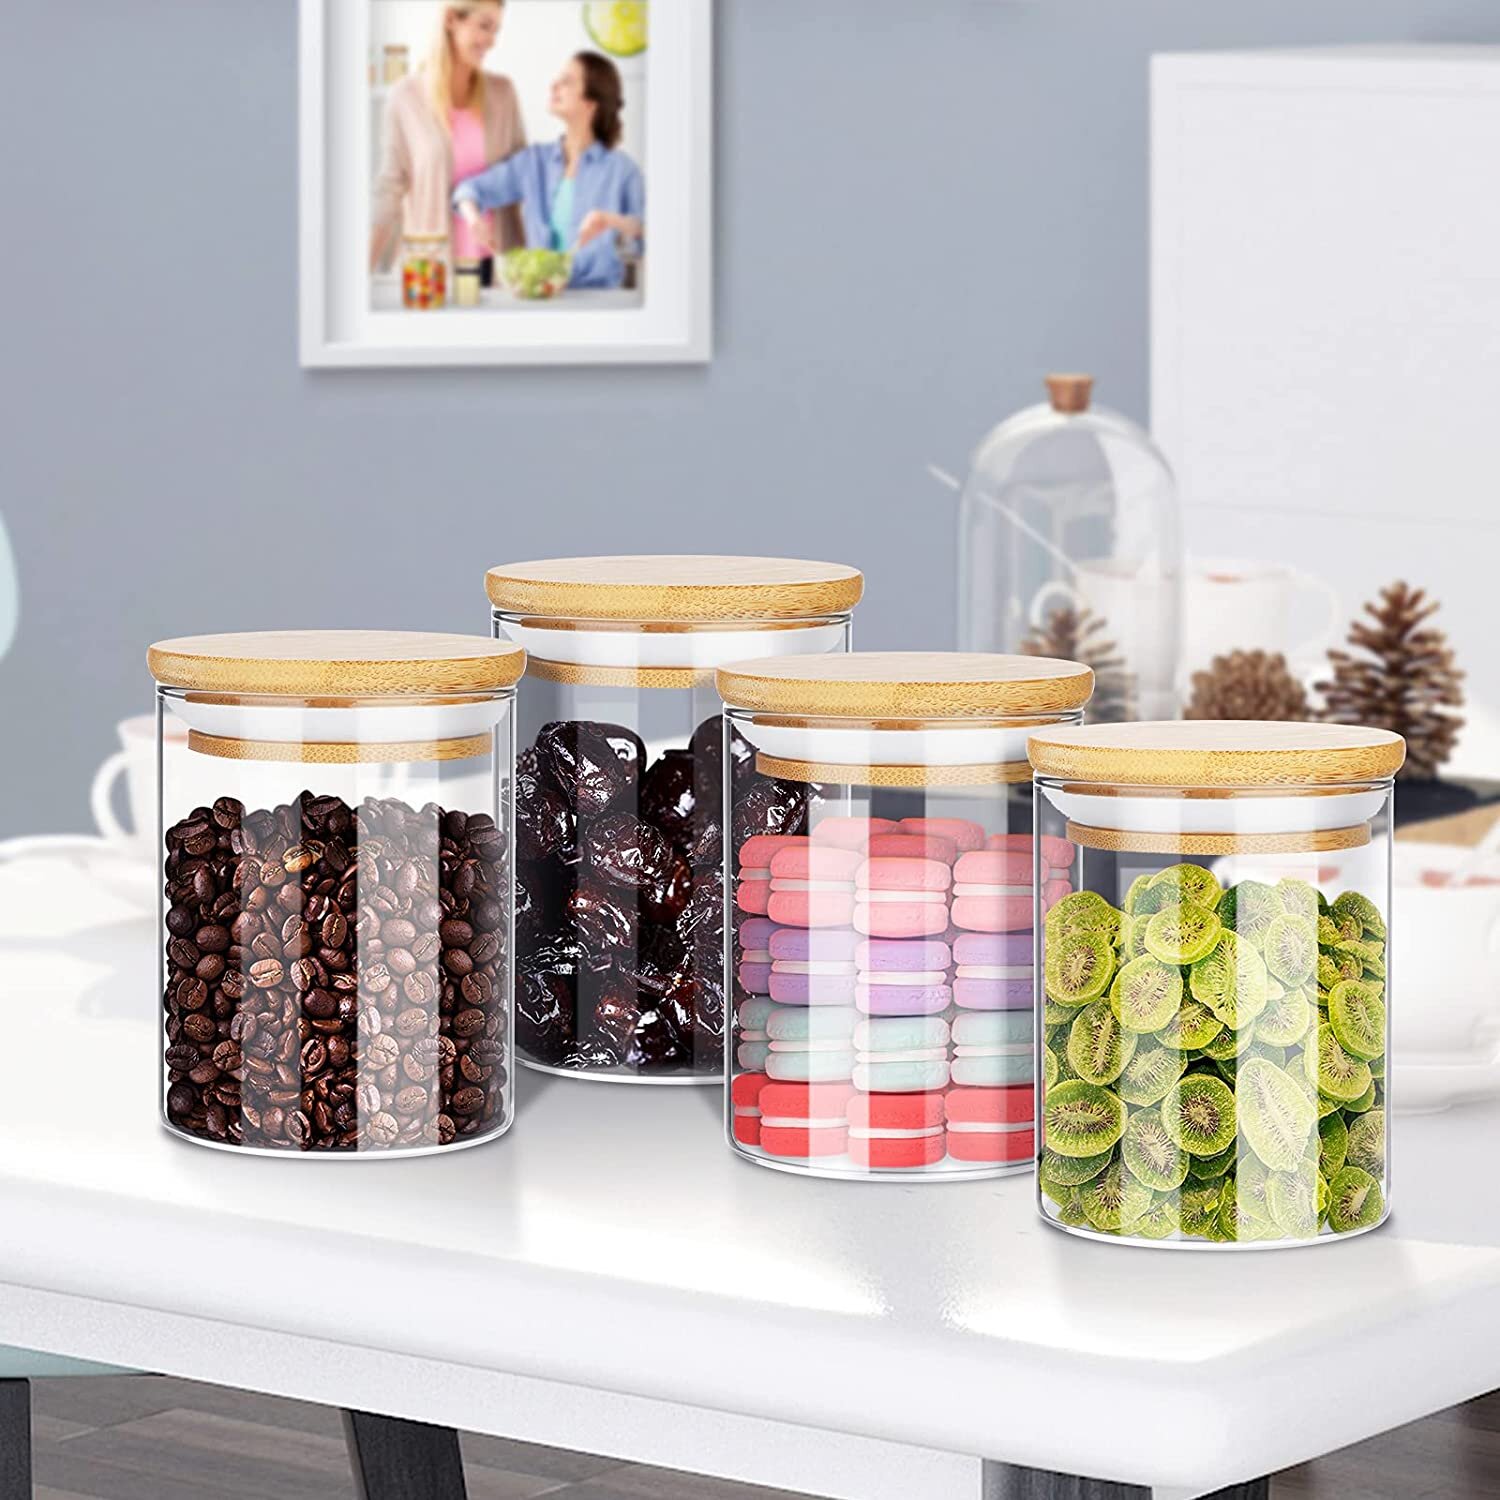 Airtight Food Storage Containers Plastic Kitchen Storage Jars & Container Set 6